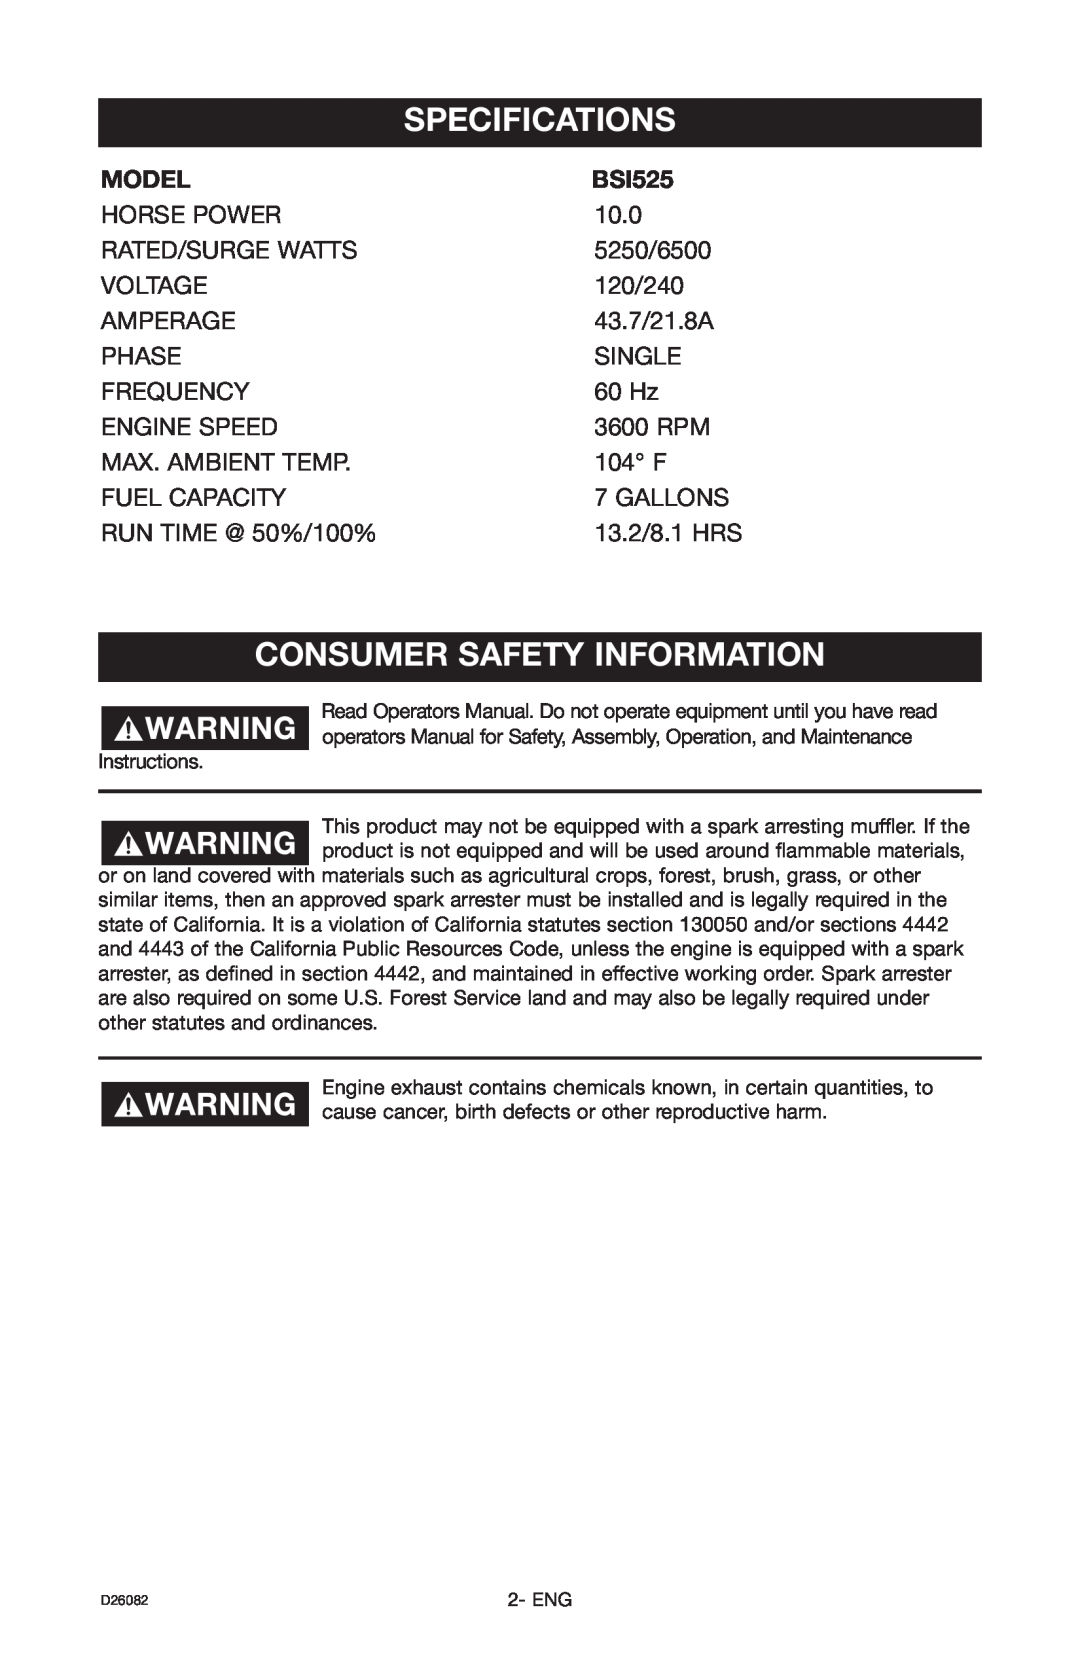 Porter-Cable BSI525 instruction manual Specifications, Consumer Safety Information, Model 